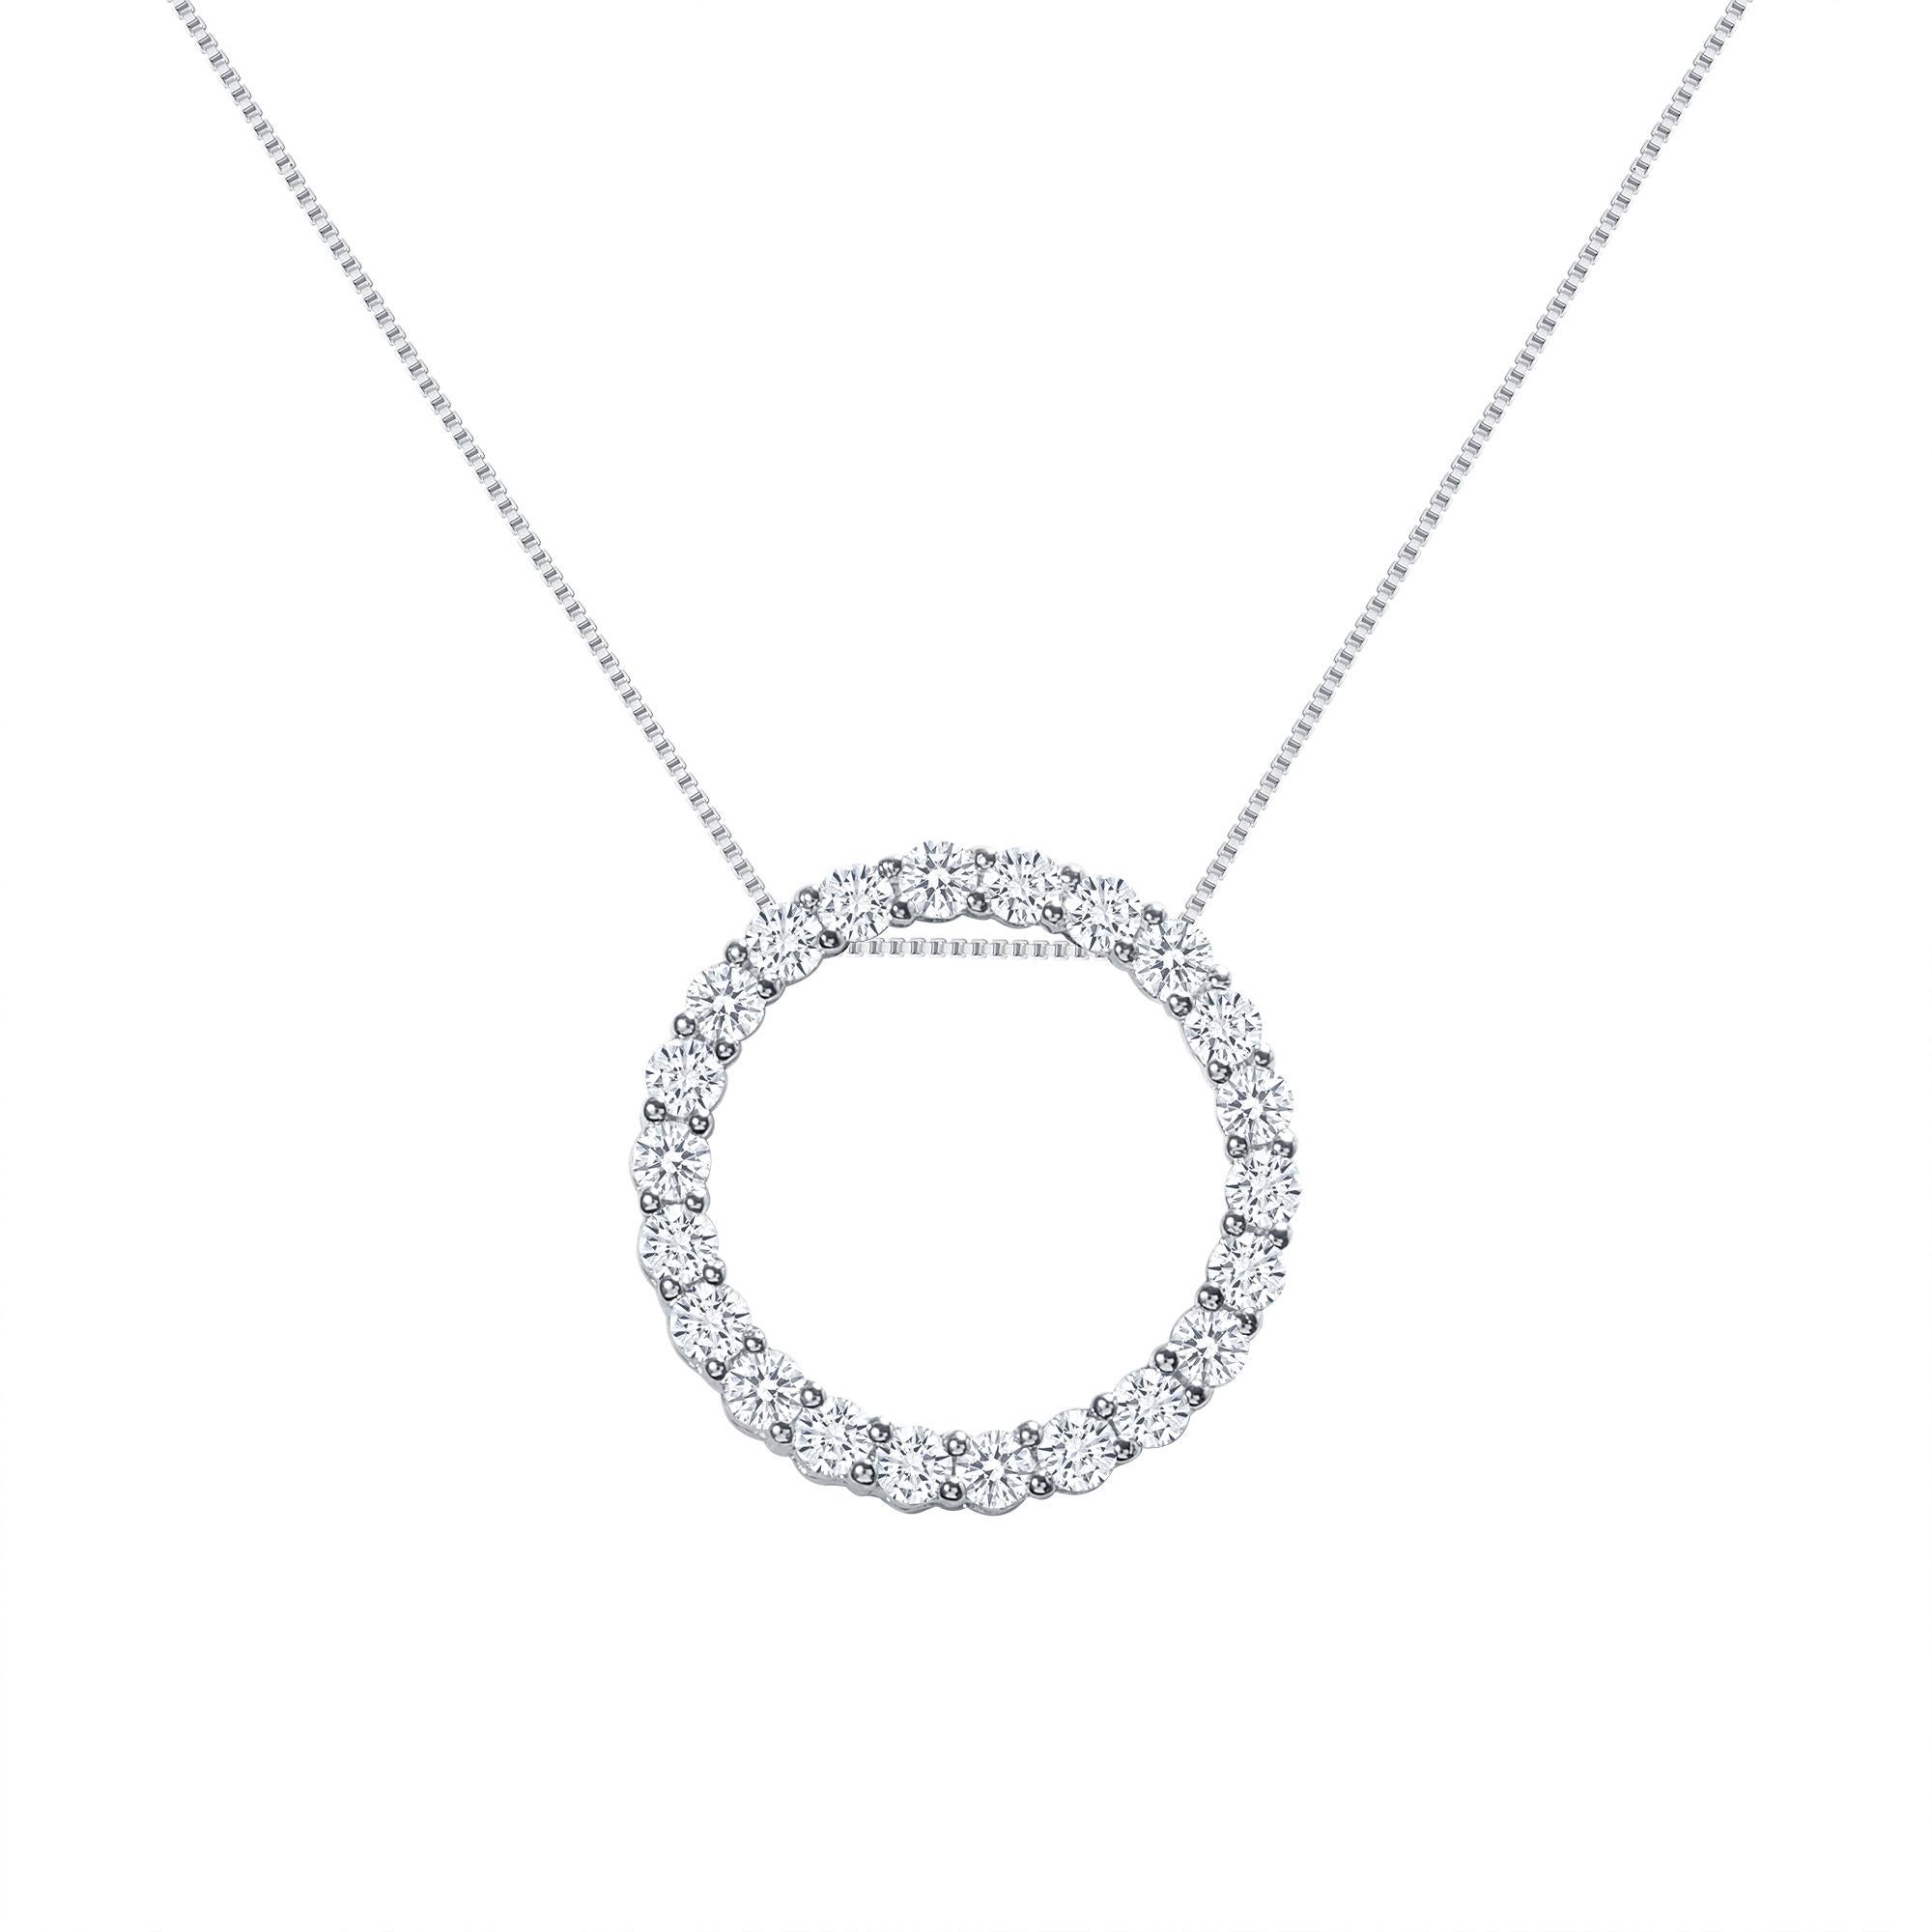 This diamond circle pendant provides a glowing chic look.
Metal: 14k Gold
Diamond Total Carats: 3 carat
Diamond Cut: Round Natural Diamonds (Not Lab Grown)
Diamond Clarity: VS
Diamond Color: F-G
Color: White Gold
Necklace Length: 14 inches